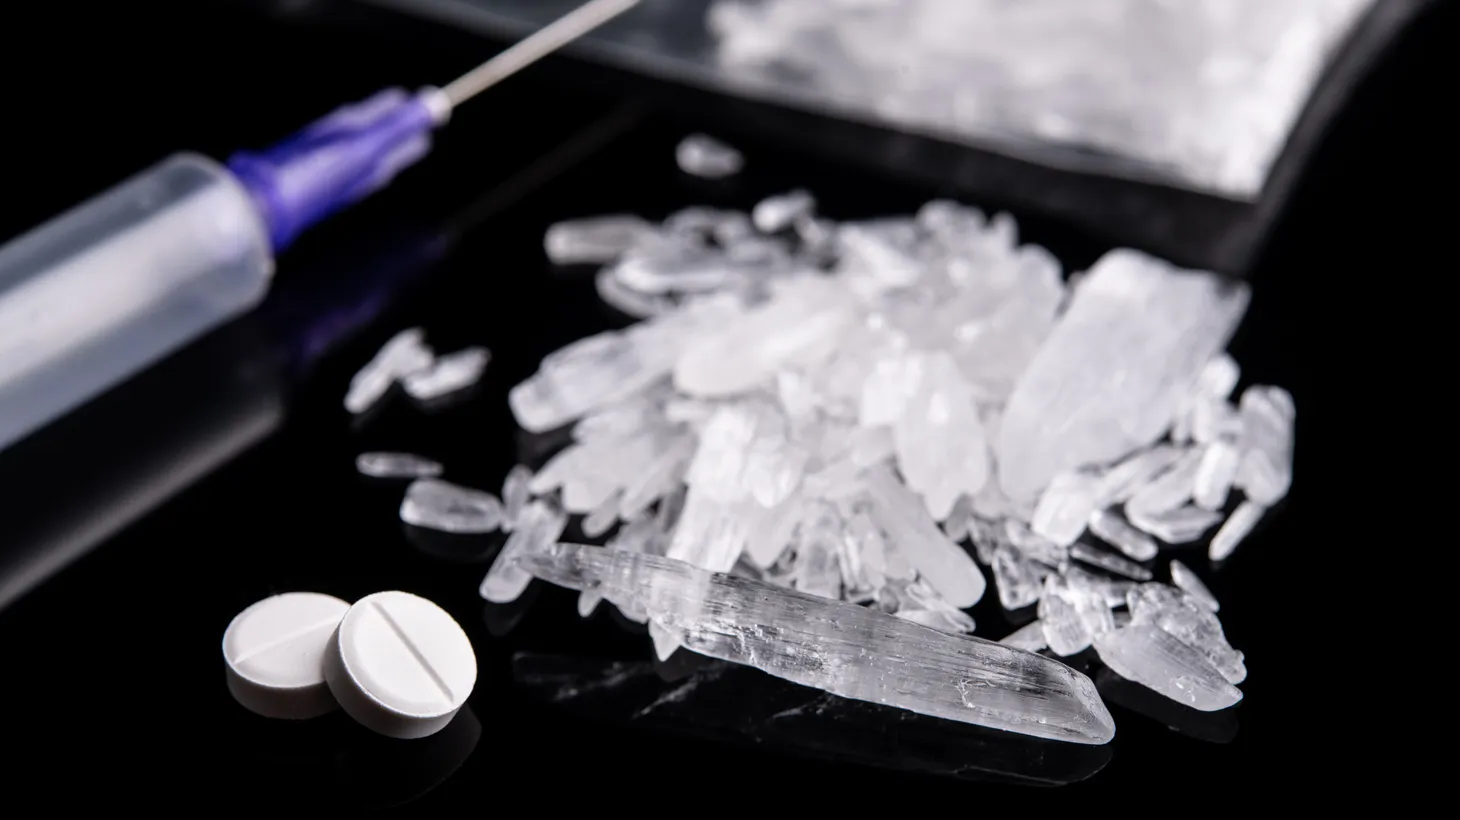 The use of meth is rising, and it’s a big problem among the state’s unhoused population, says CalMatters Reporter Marisa Kendall.